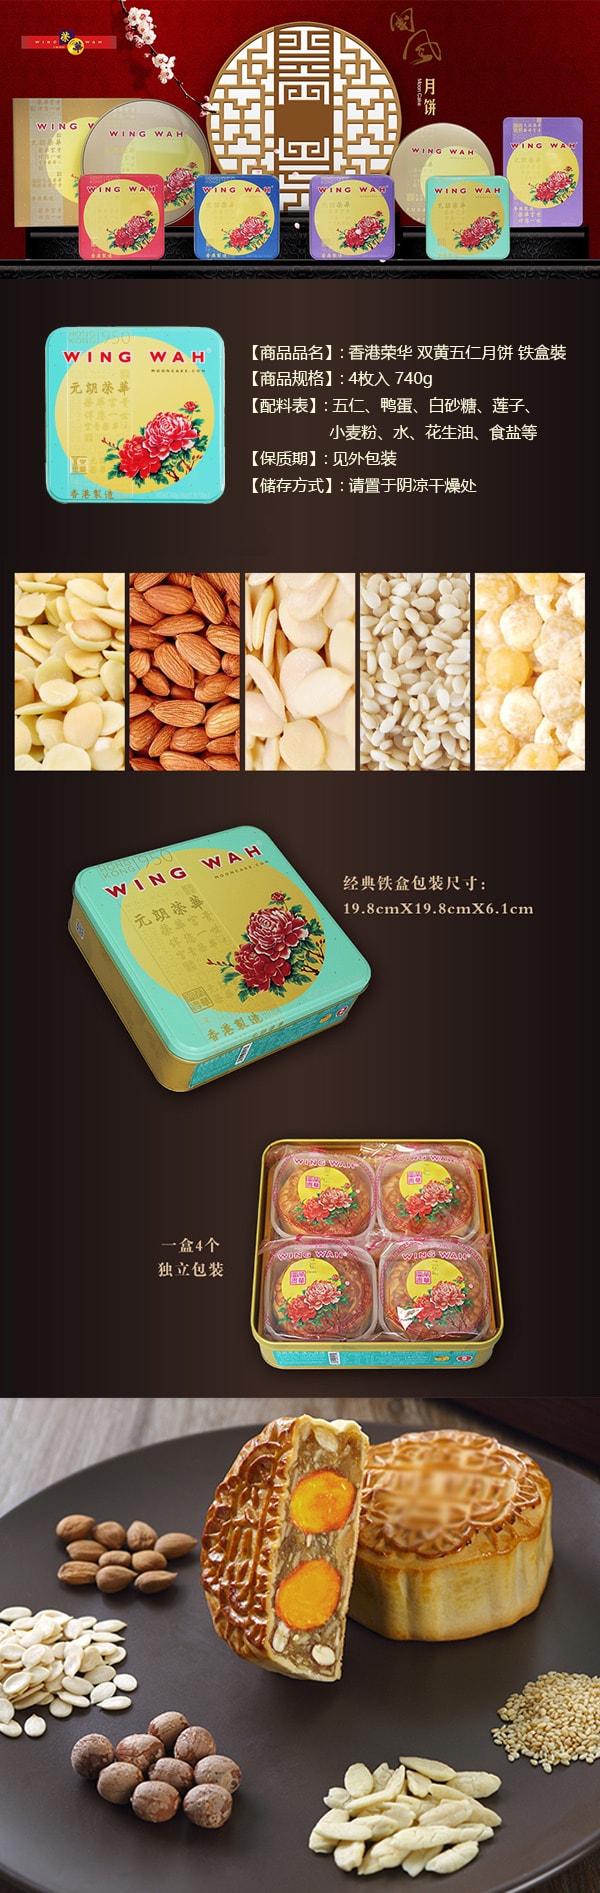 Mixed Nuts Mooncake with 2 Yolks 4 Pieces Gift Box 740g 【Delivery Date: End of August】